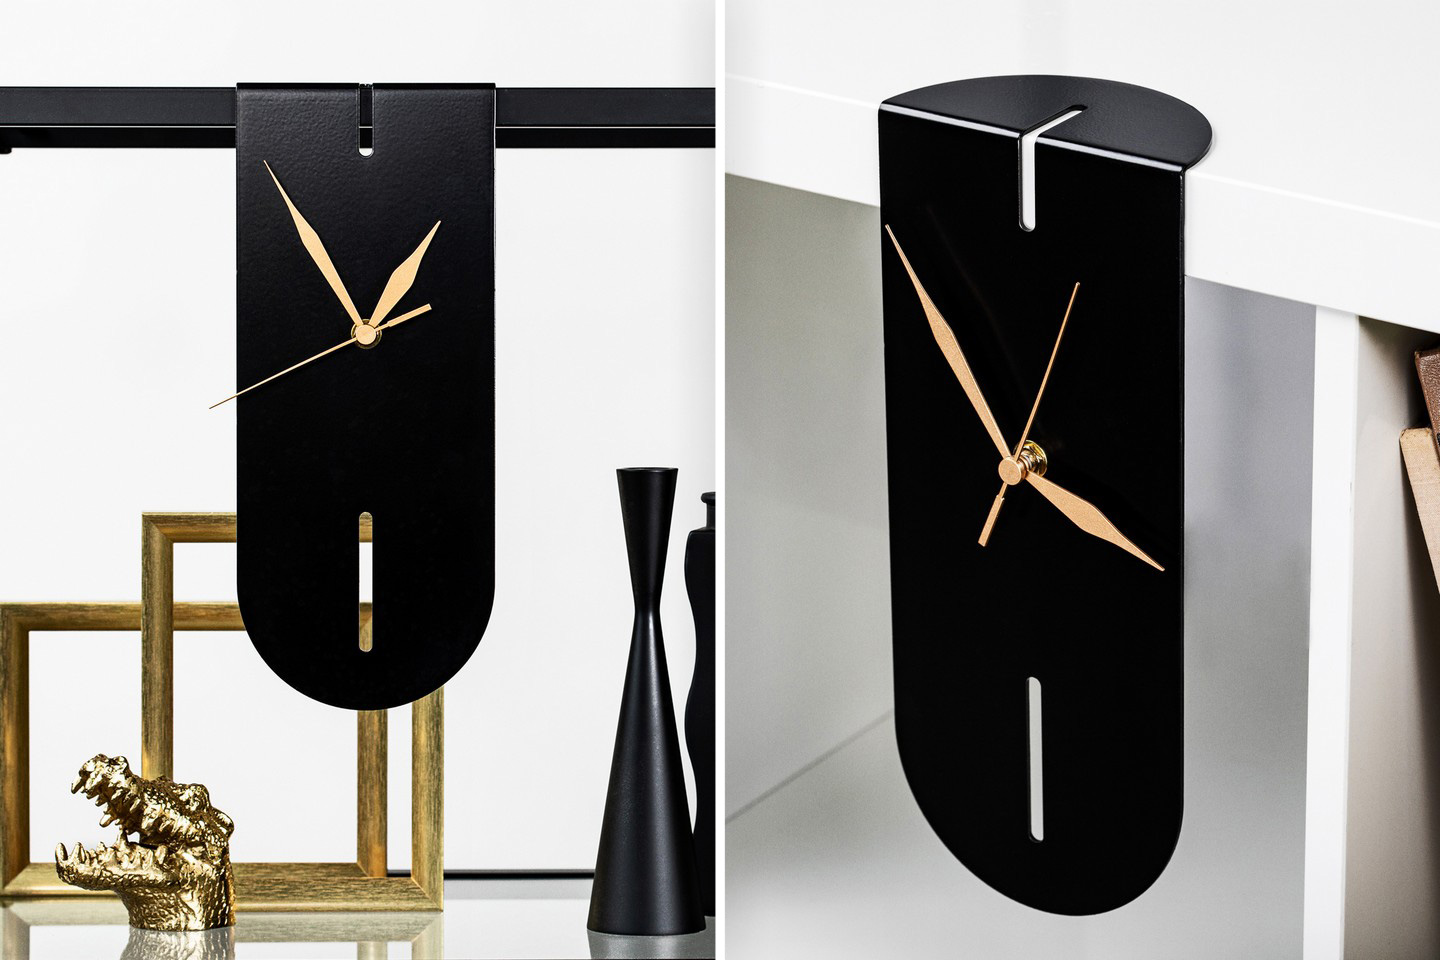 #The Salvador Clock is a modern interpretation of the clocks from Dali’s Persistence Of Memory